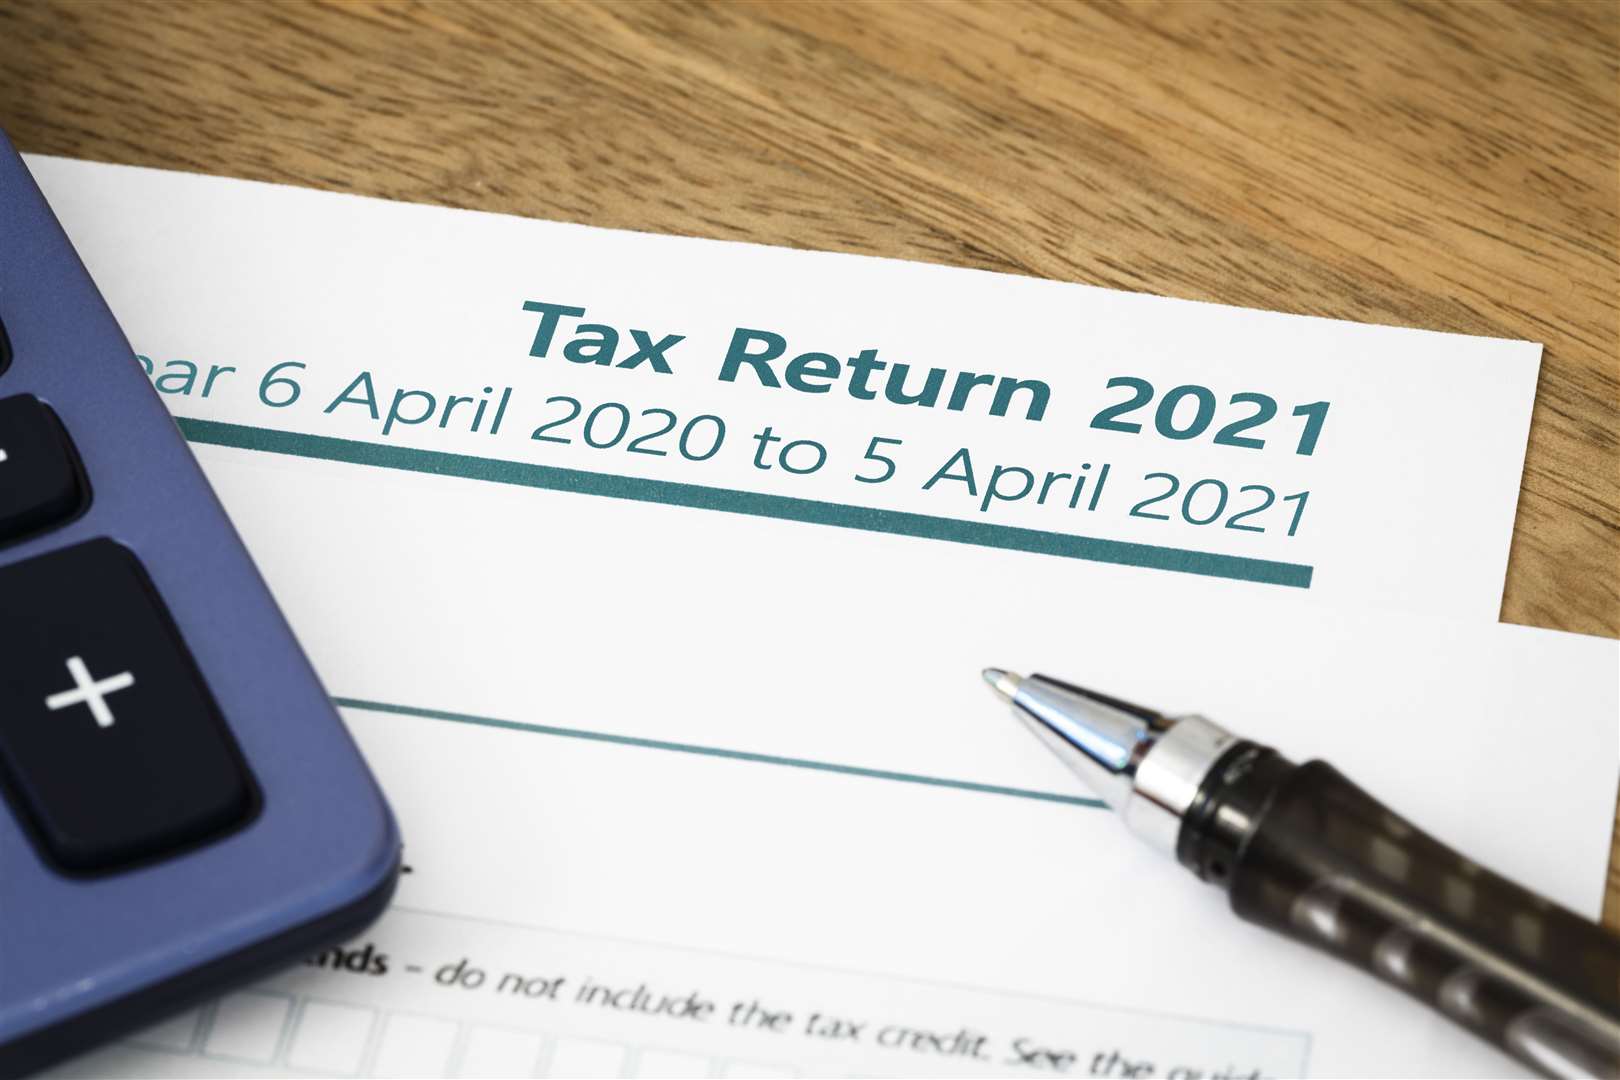 More than 12 million people are due to file a tax return by the end of this month